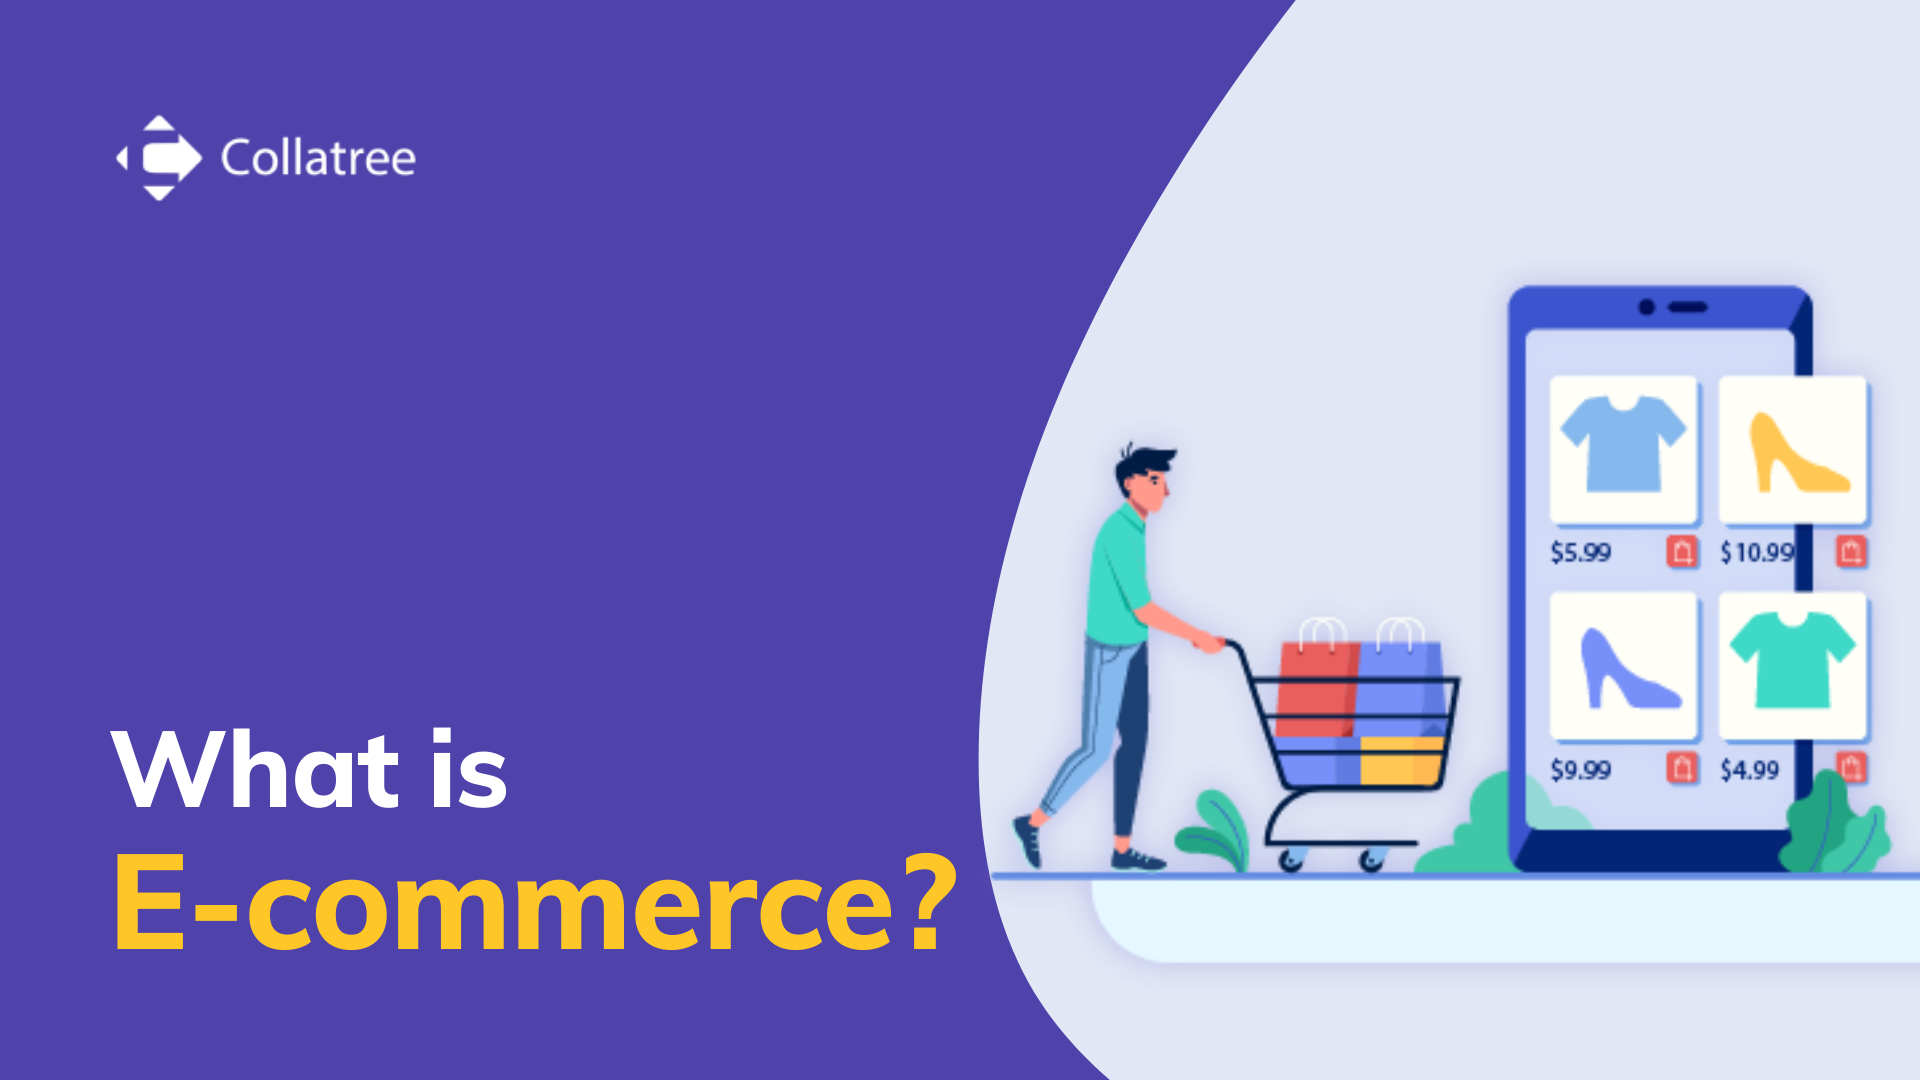 What is E-commerce? How is it important in your business?